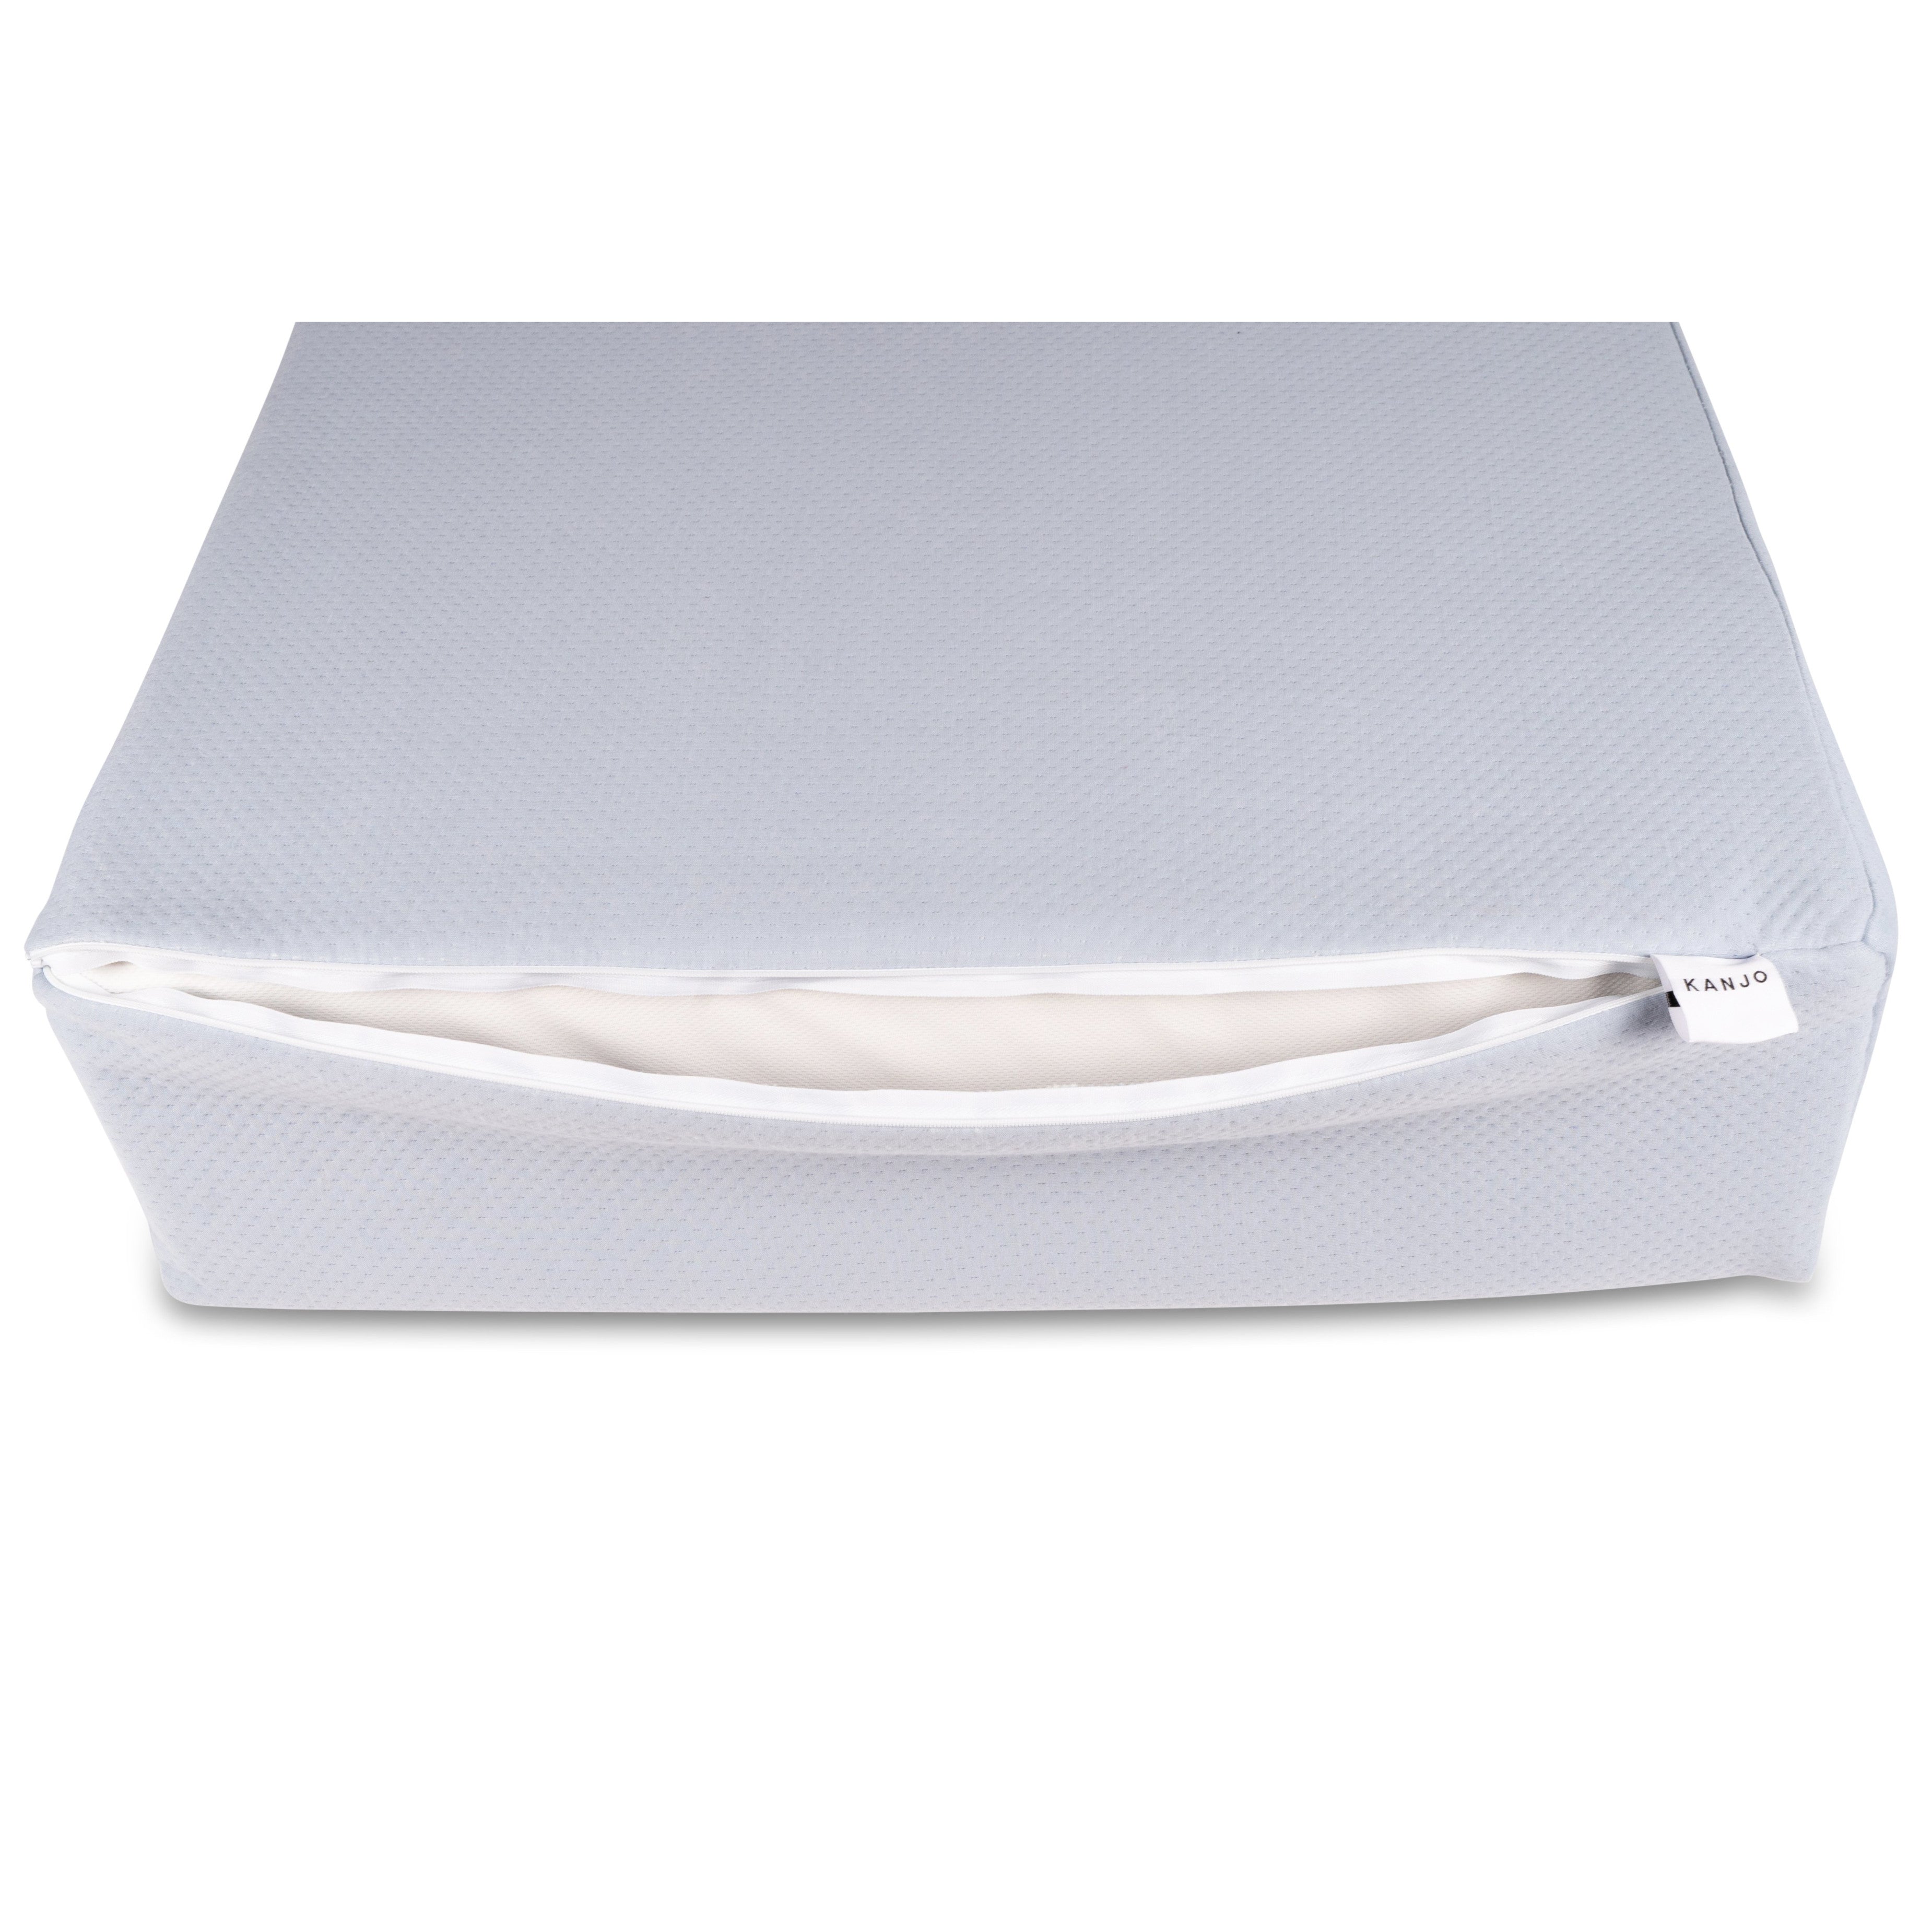 Kanjo Acid Reflux and Pain Relief Wedge Pillow